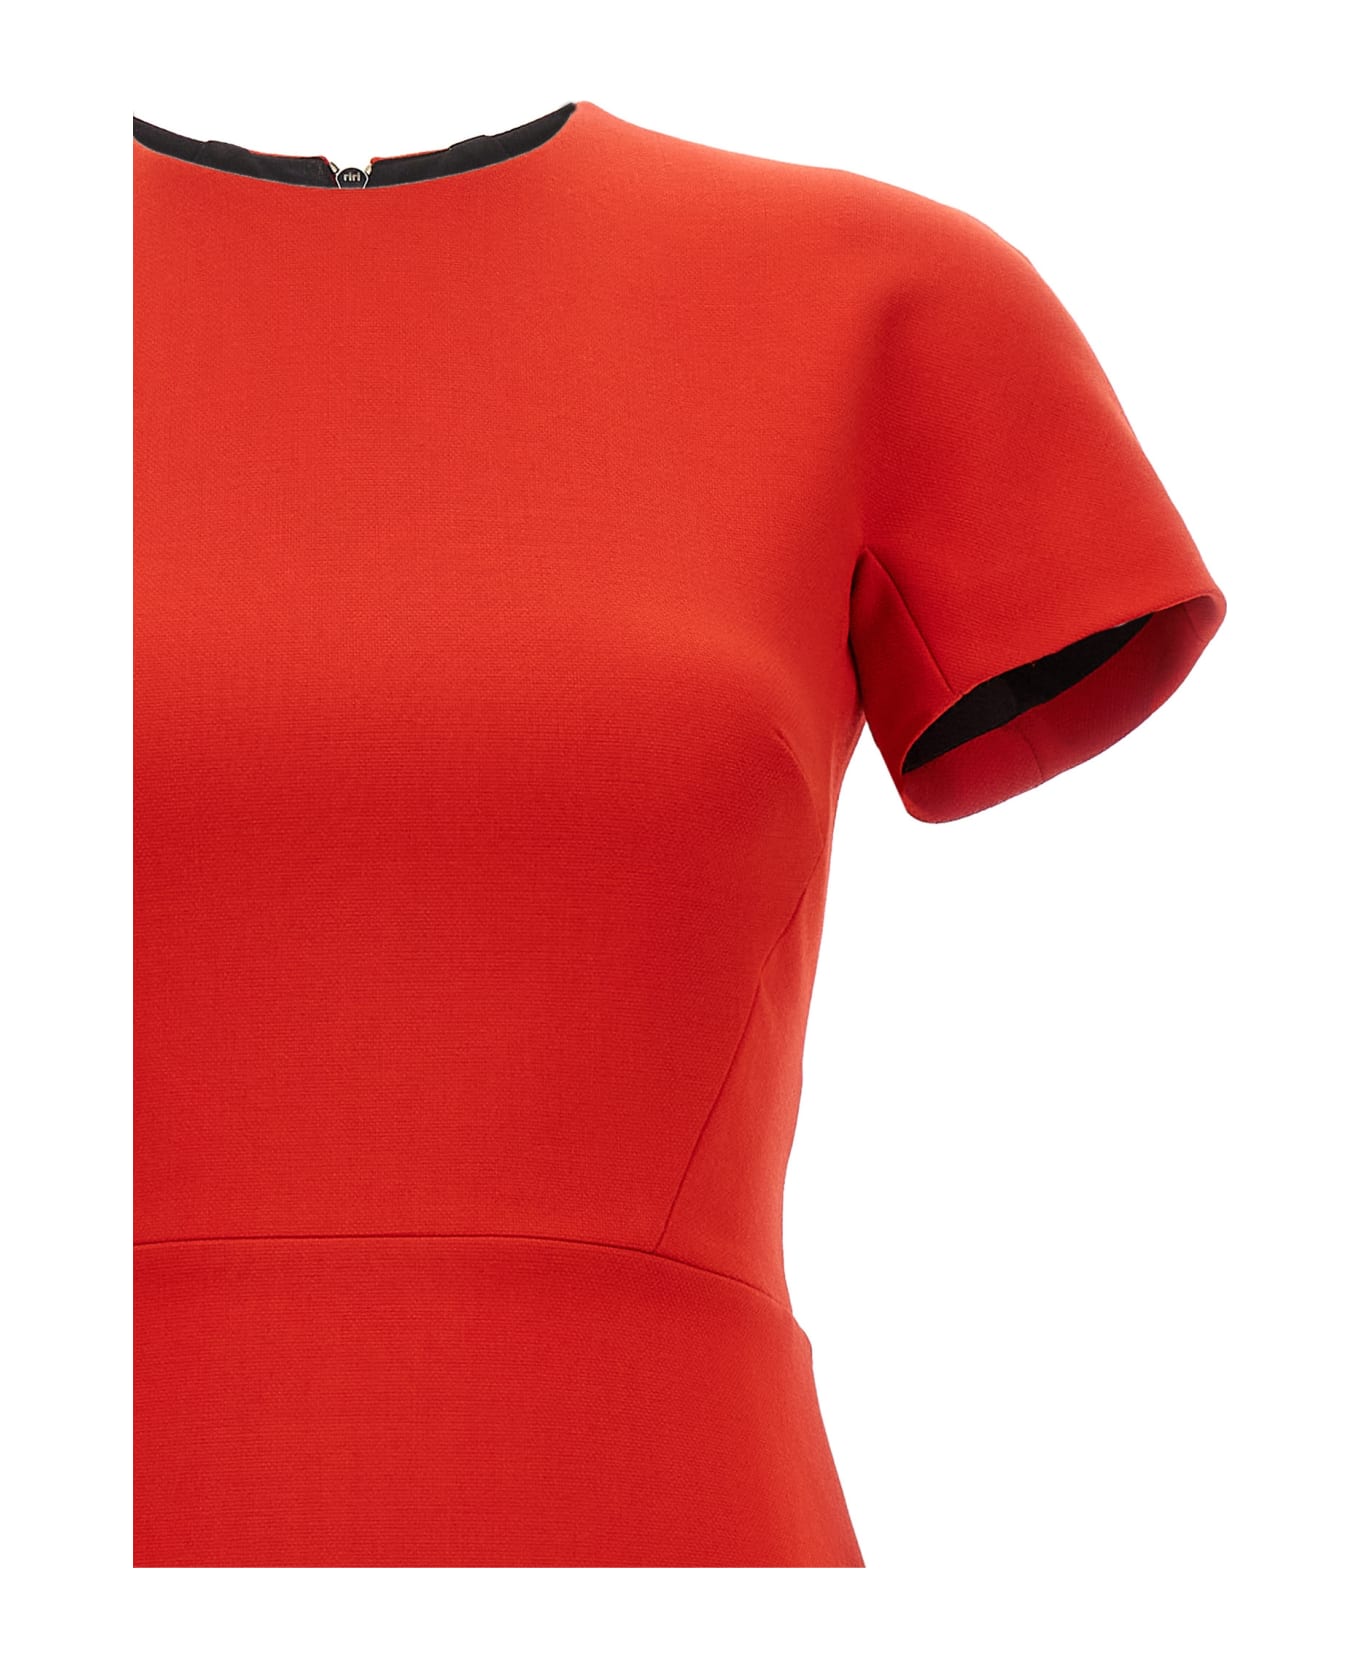 Victoria Beckham 'fitted T-shirt' Dress - Red ワンピース＆ドレス